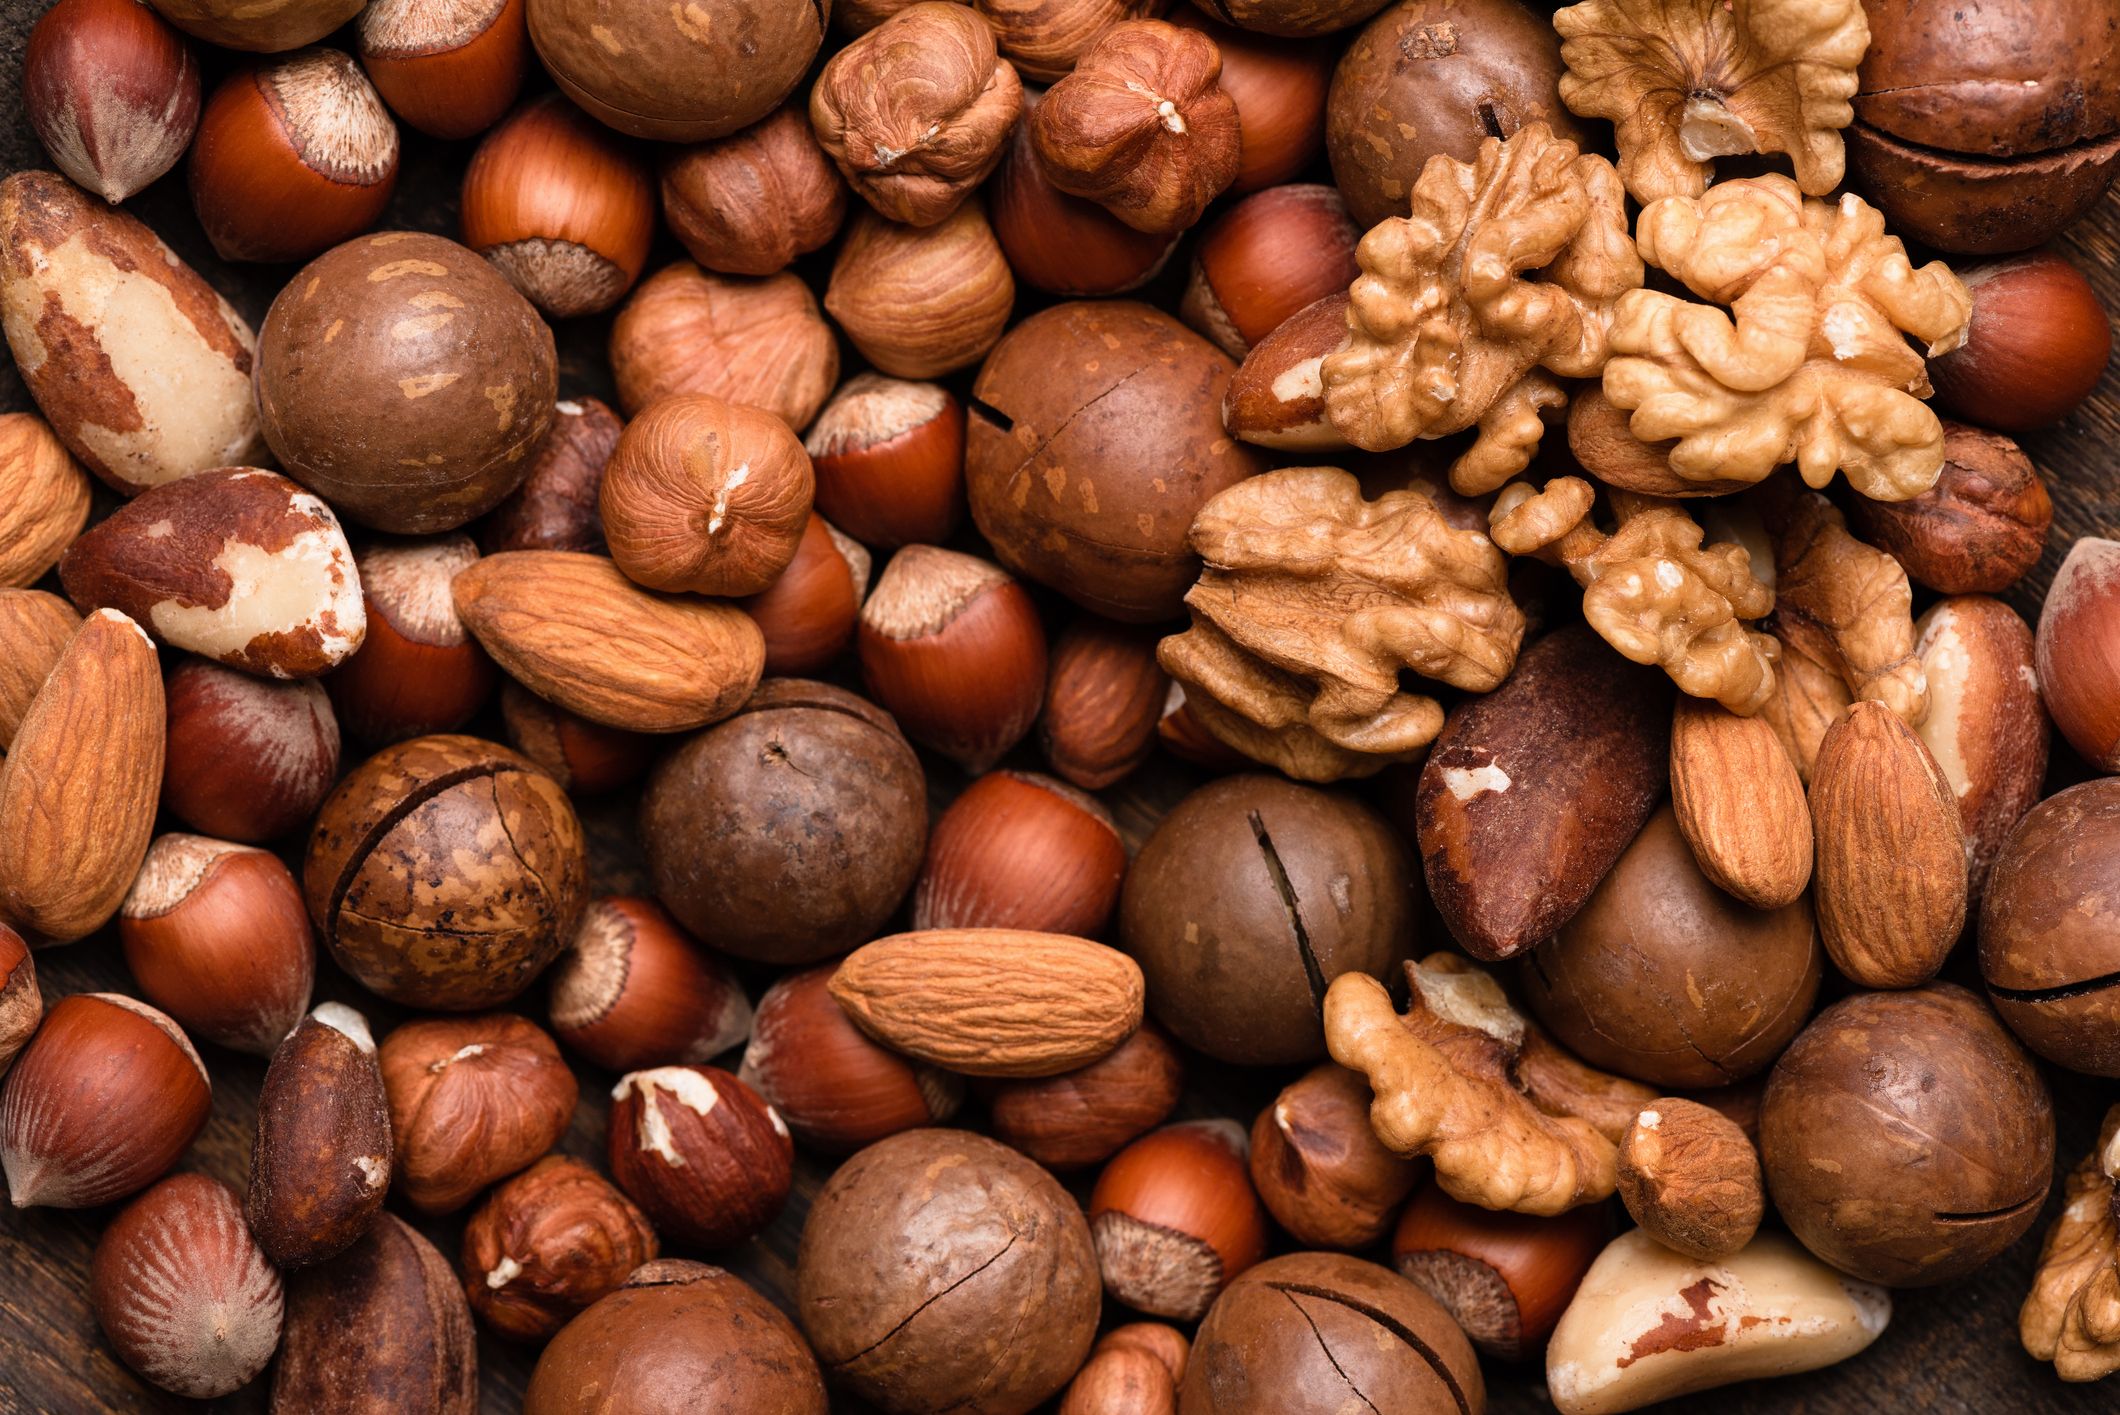 Healthiest Nuts, According to Research and Experts